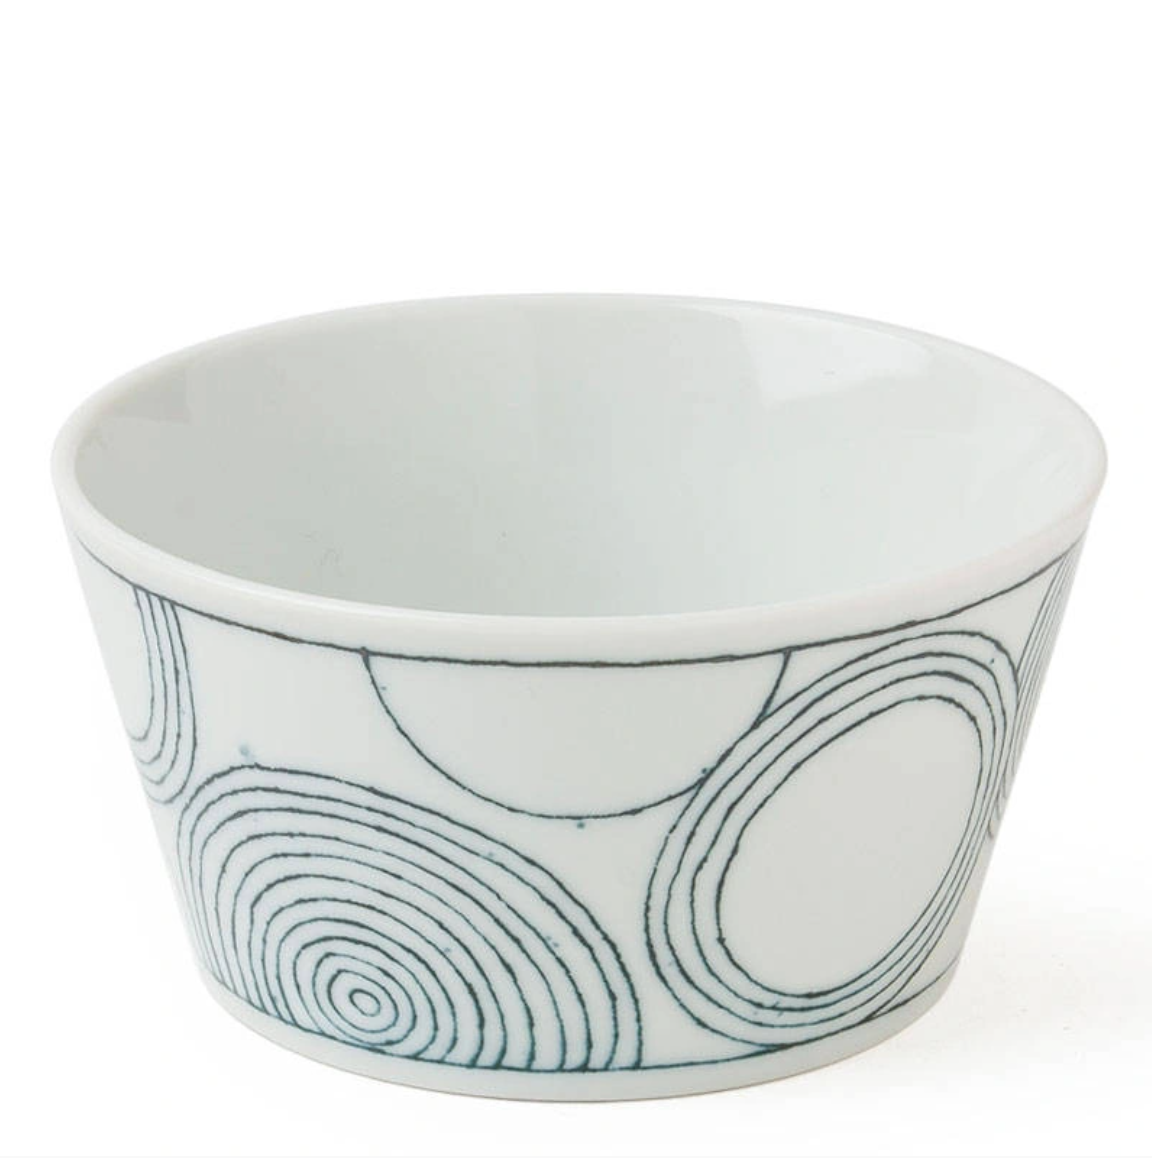 Paper Cords Dipping Bowl